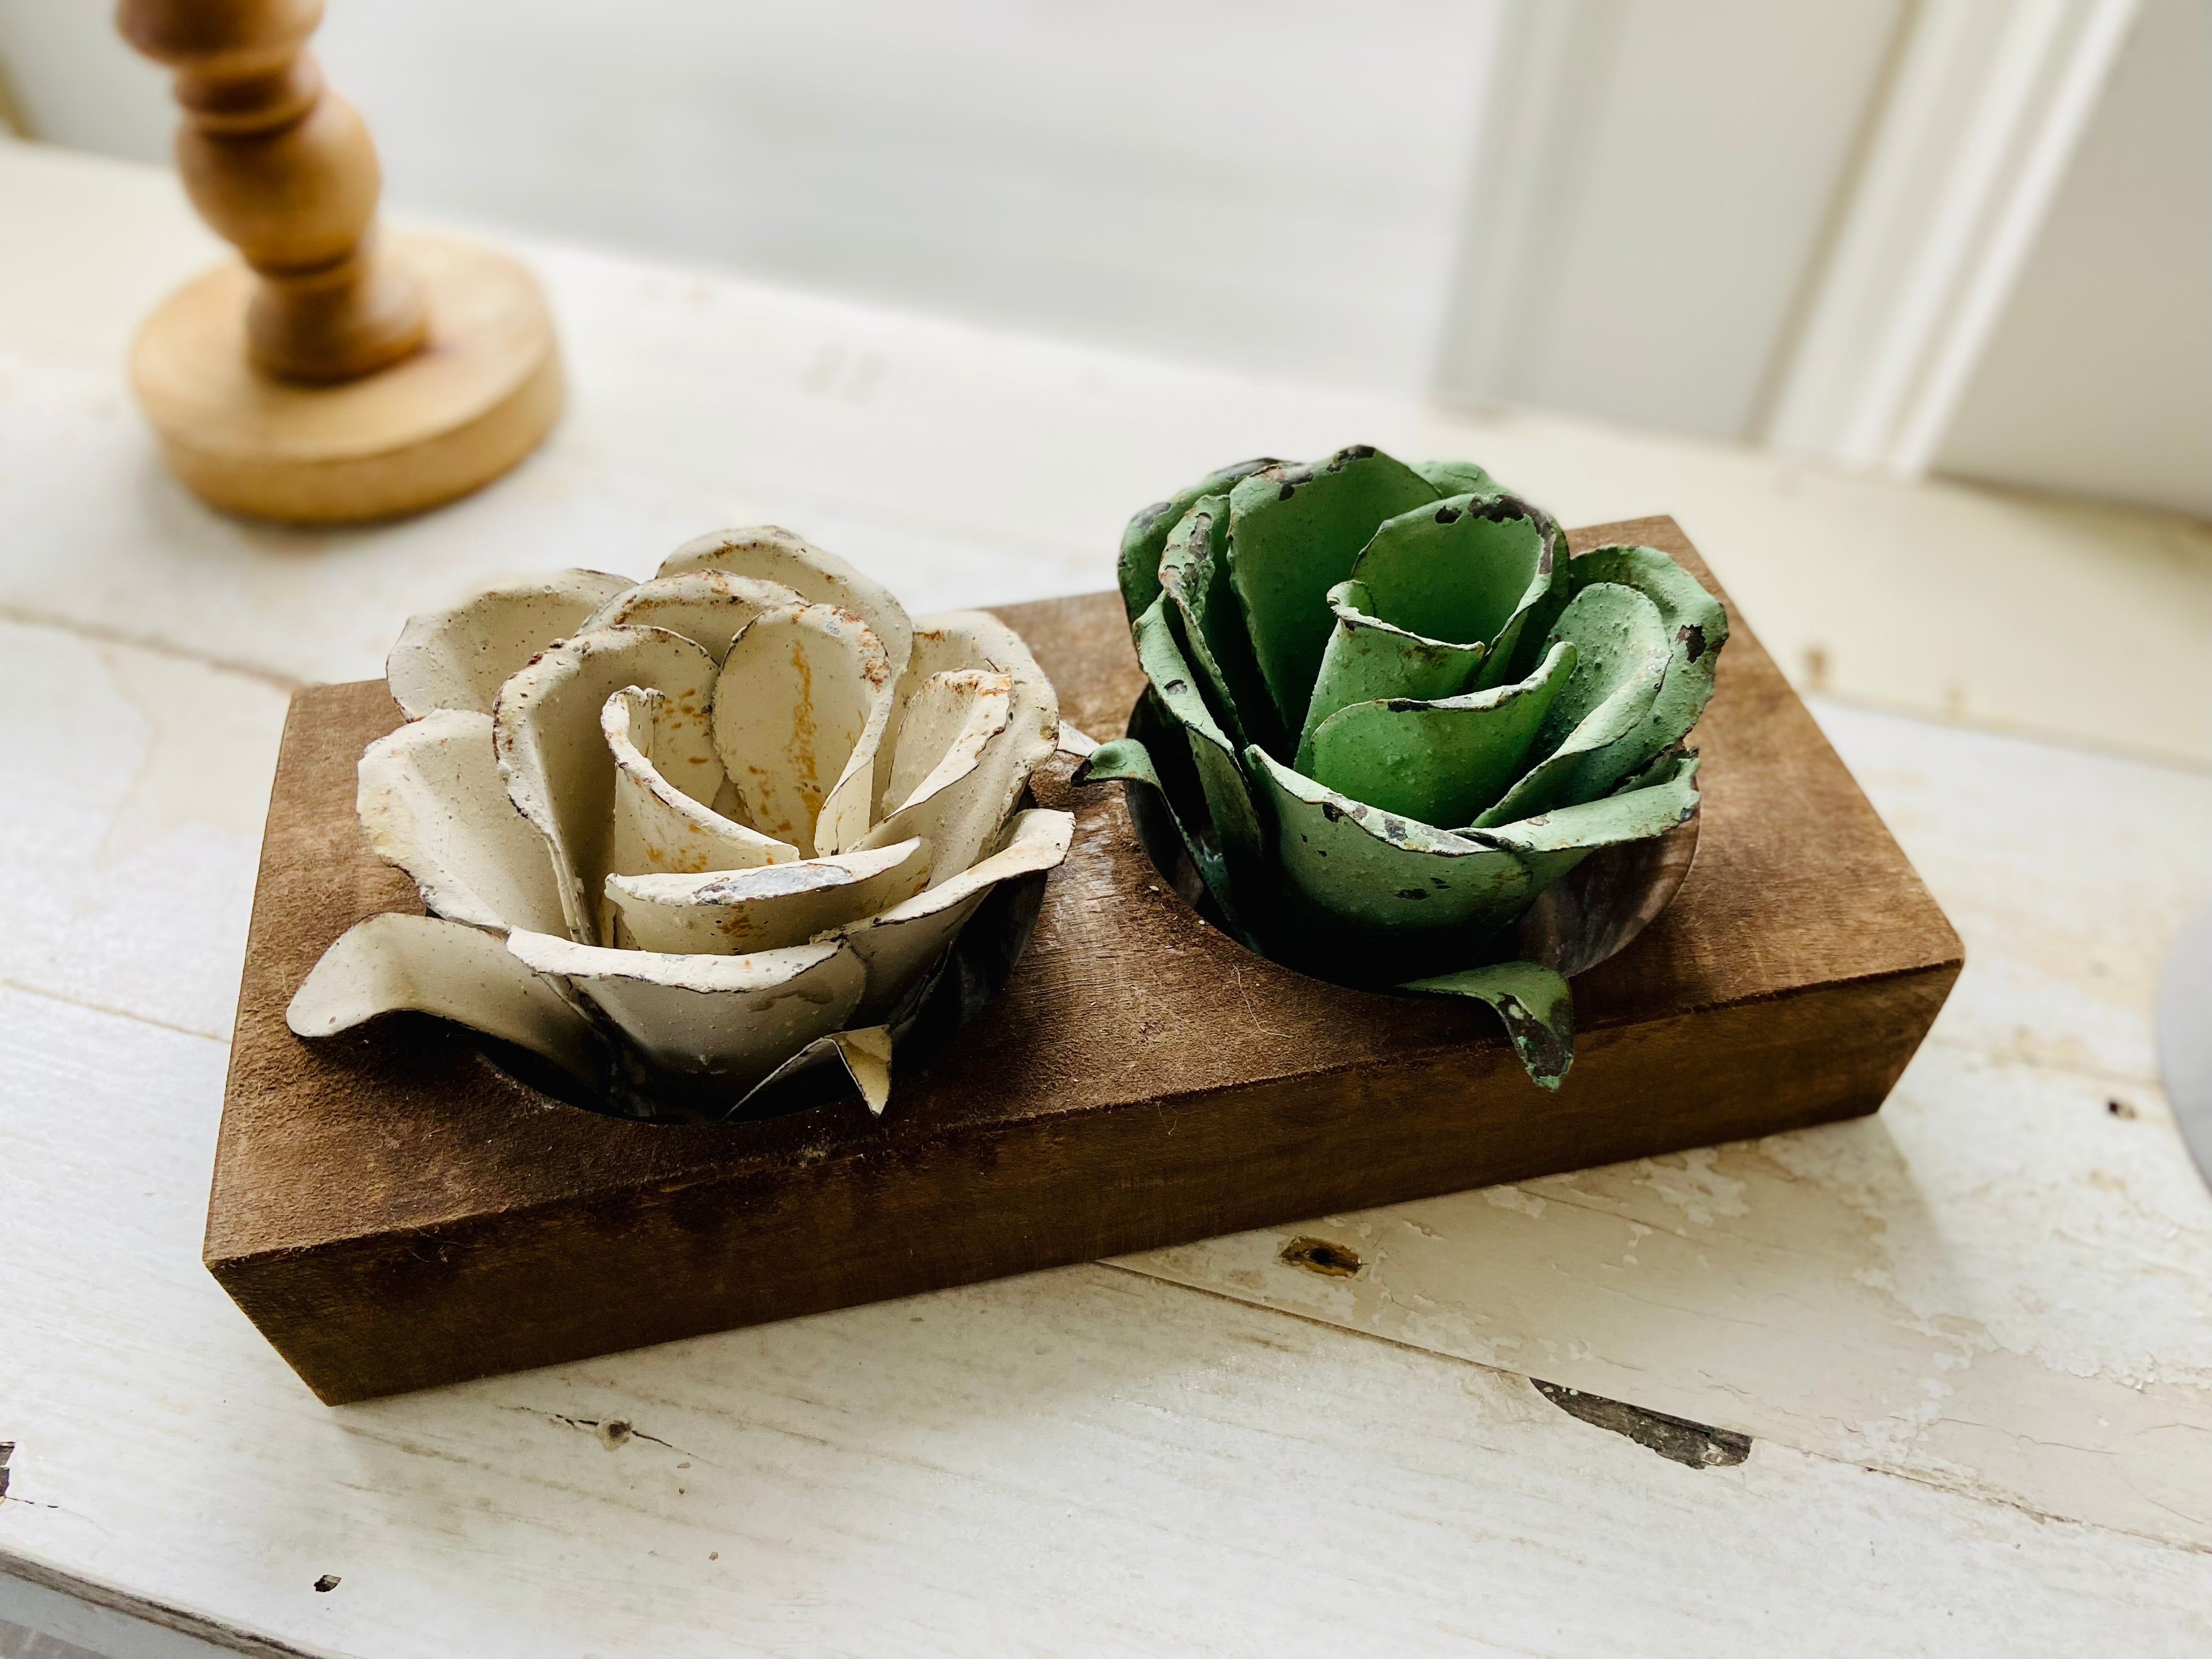 Stunning Hand Painted Metal Roses - Available in custom colors